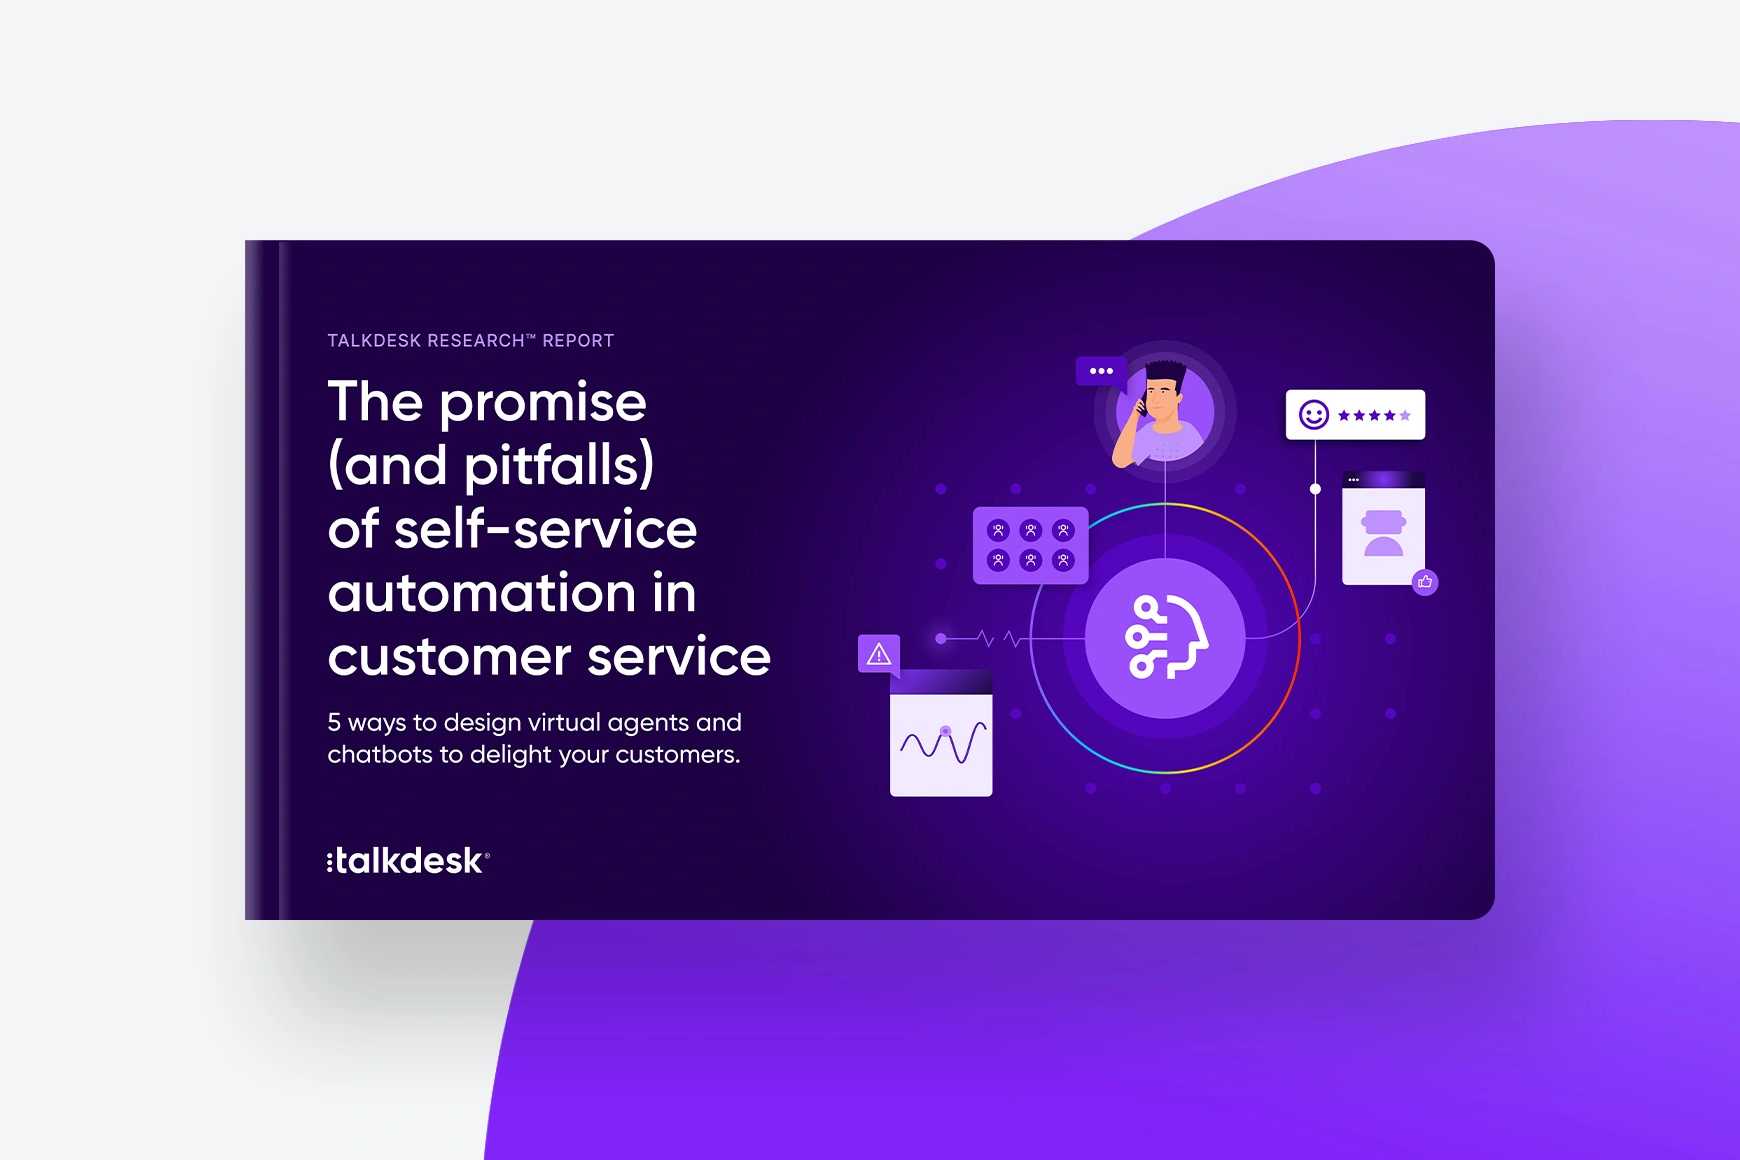 The promise (and pitfalls) of self-service automation in customer service